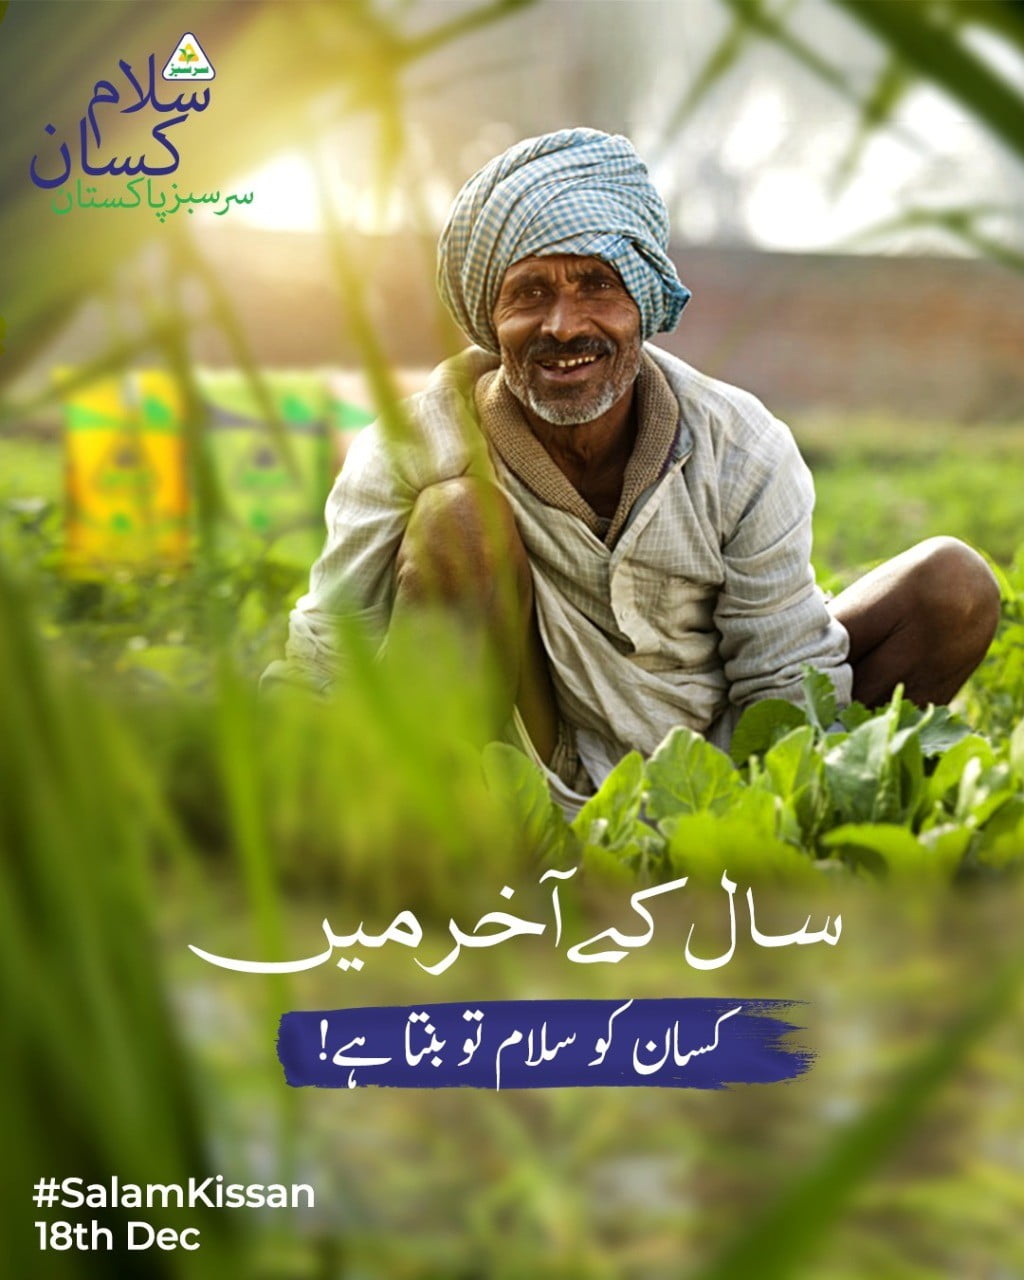 Sarsabz’s Kissan day tribute ad receives more than 4 million views in 2 days